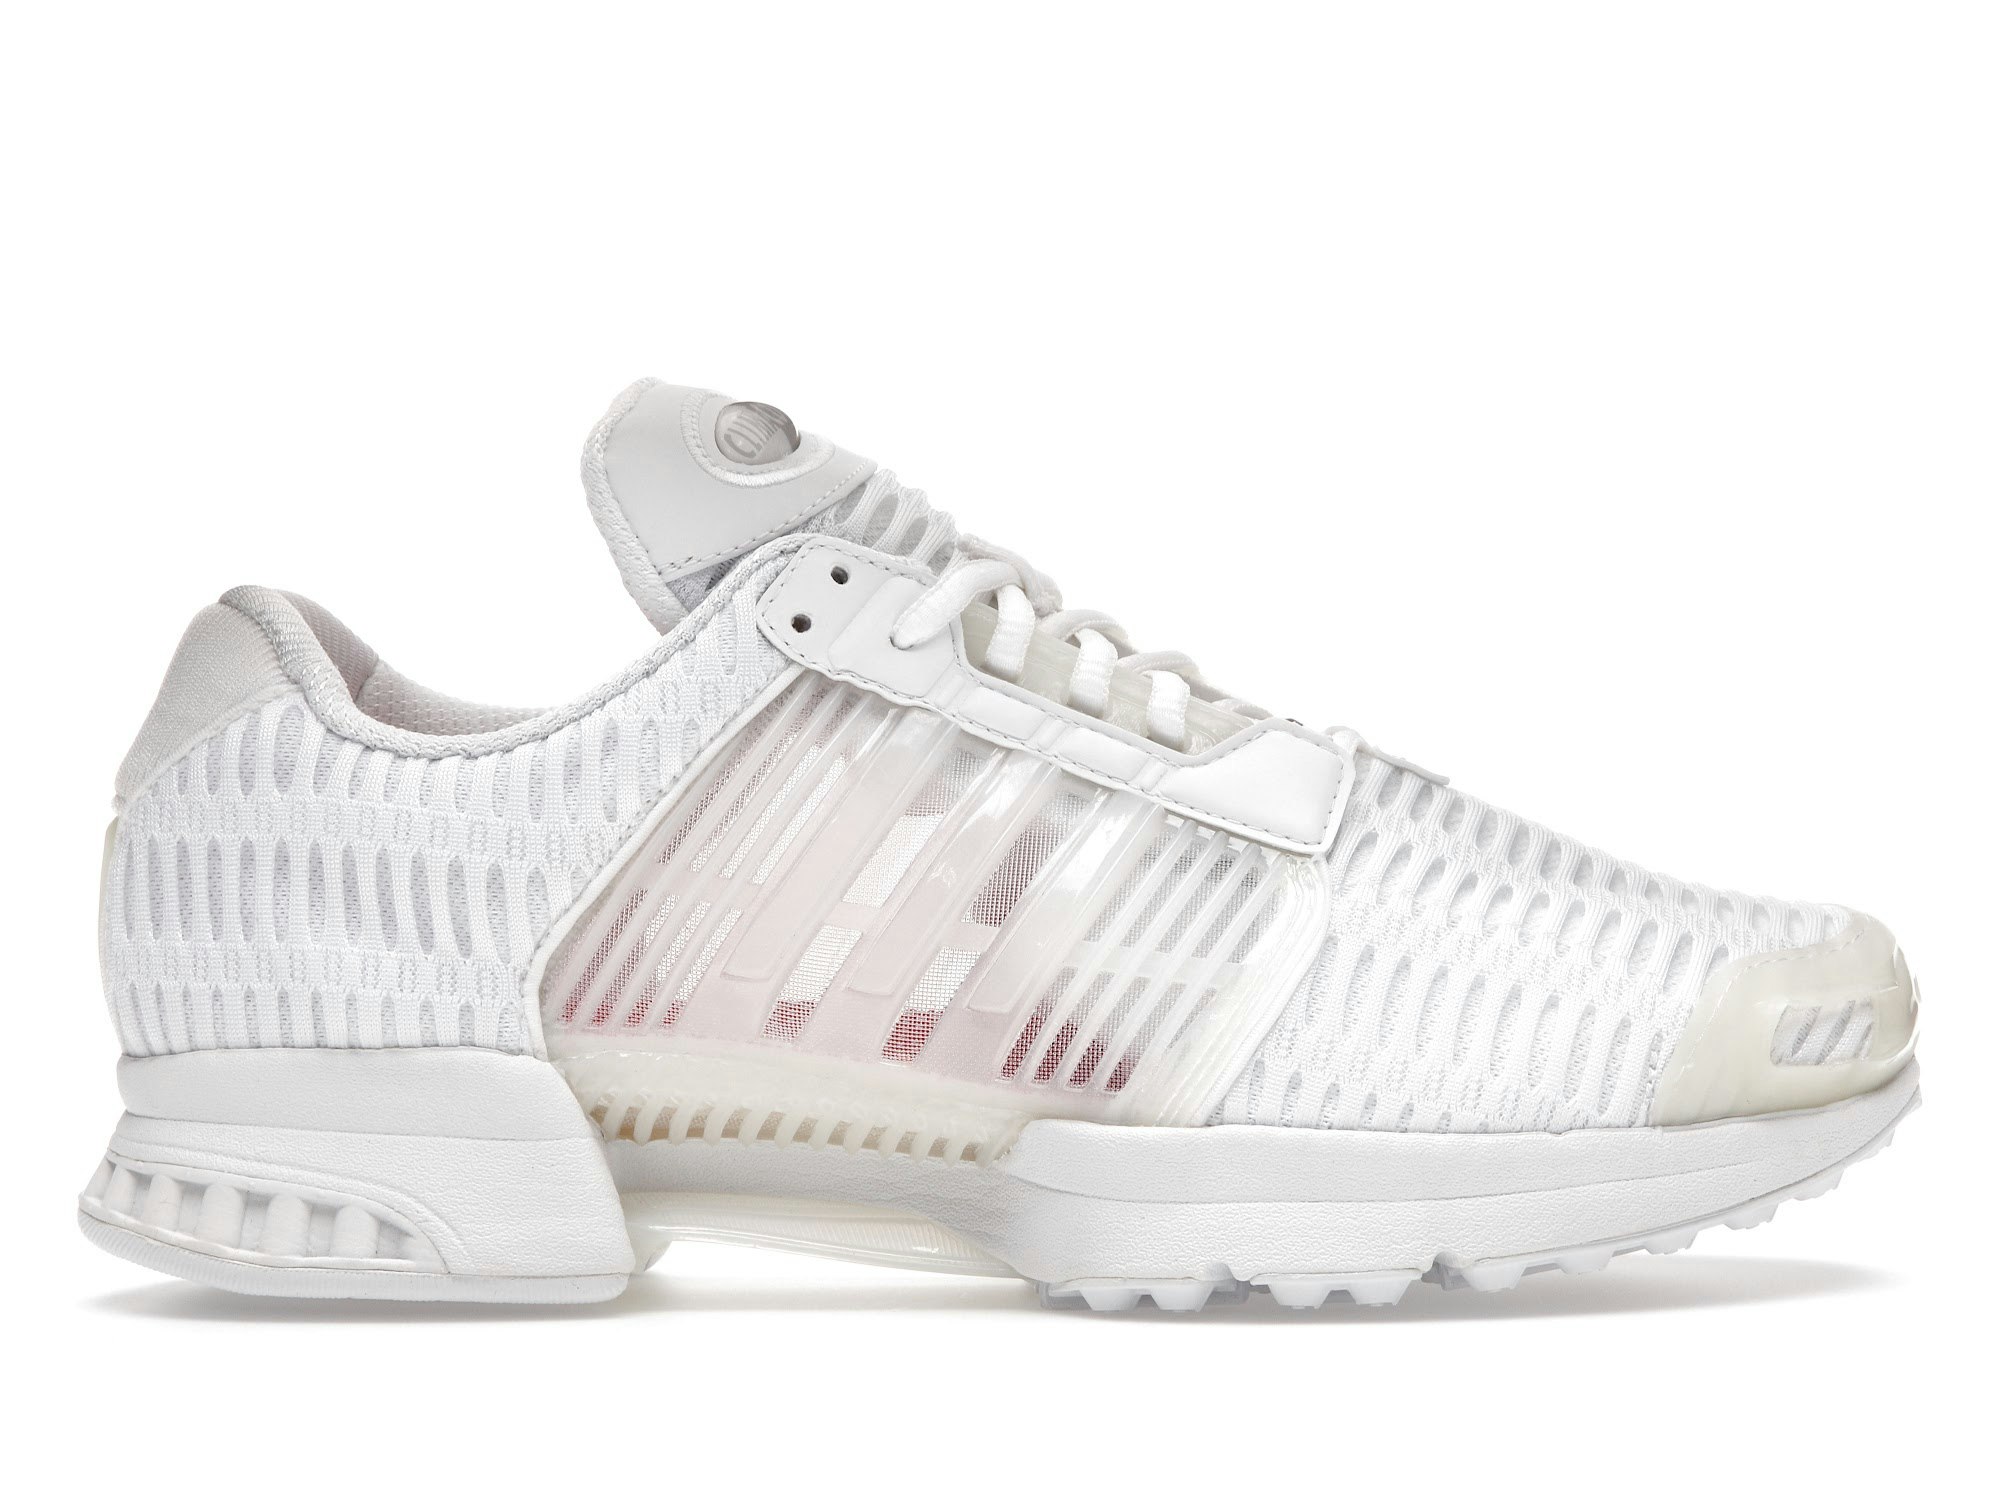 Here's What The New adidas ClimaCOOL Looks Like | Adidas, Sneakers,  Athletic trends